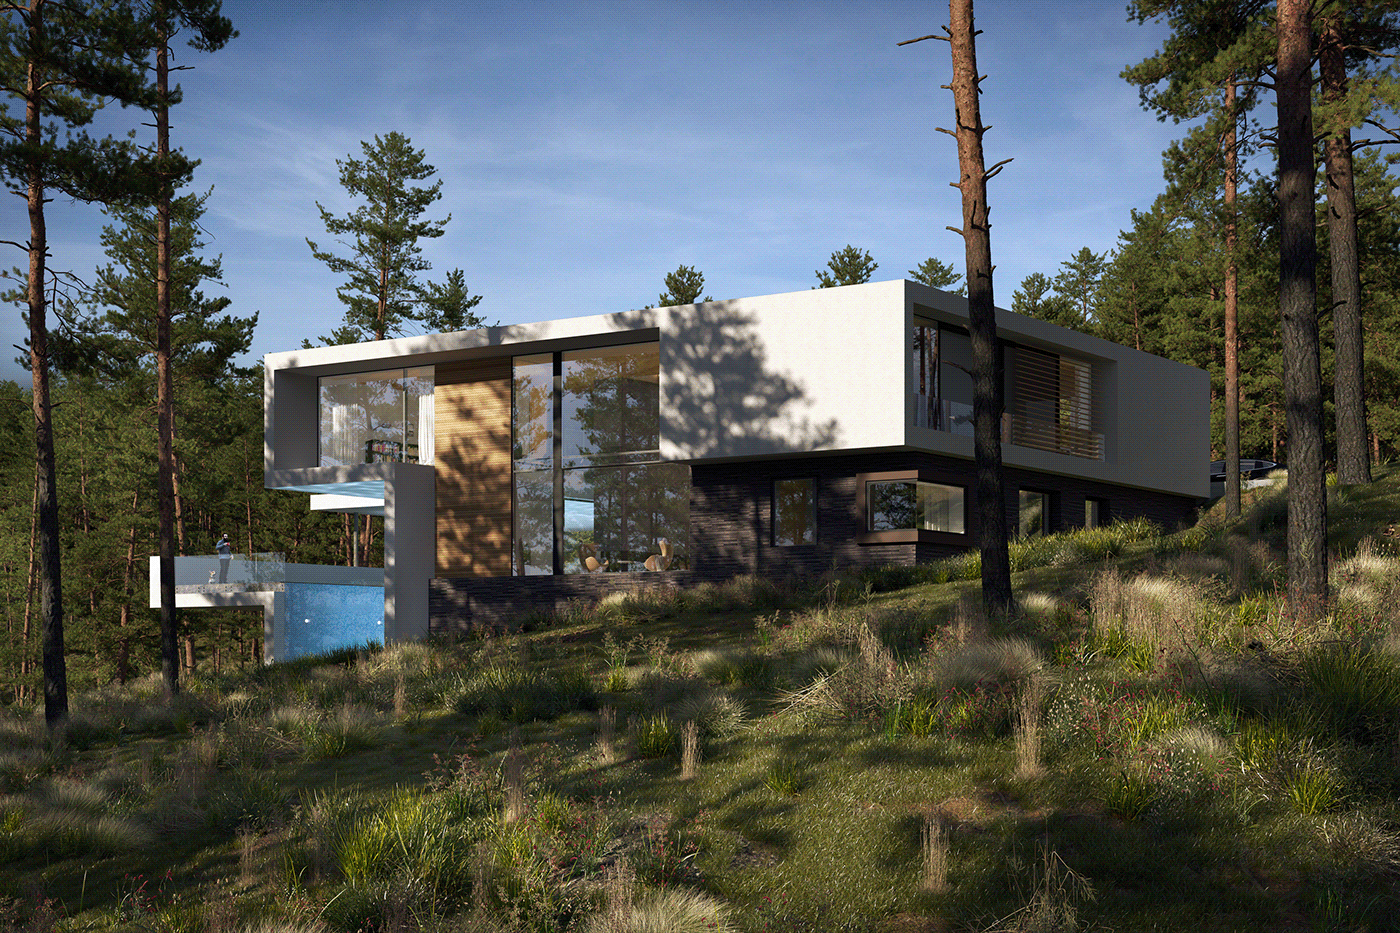 A 3D visualization of a house in the woods